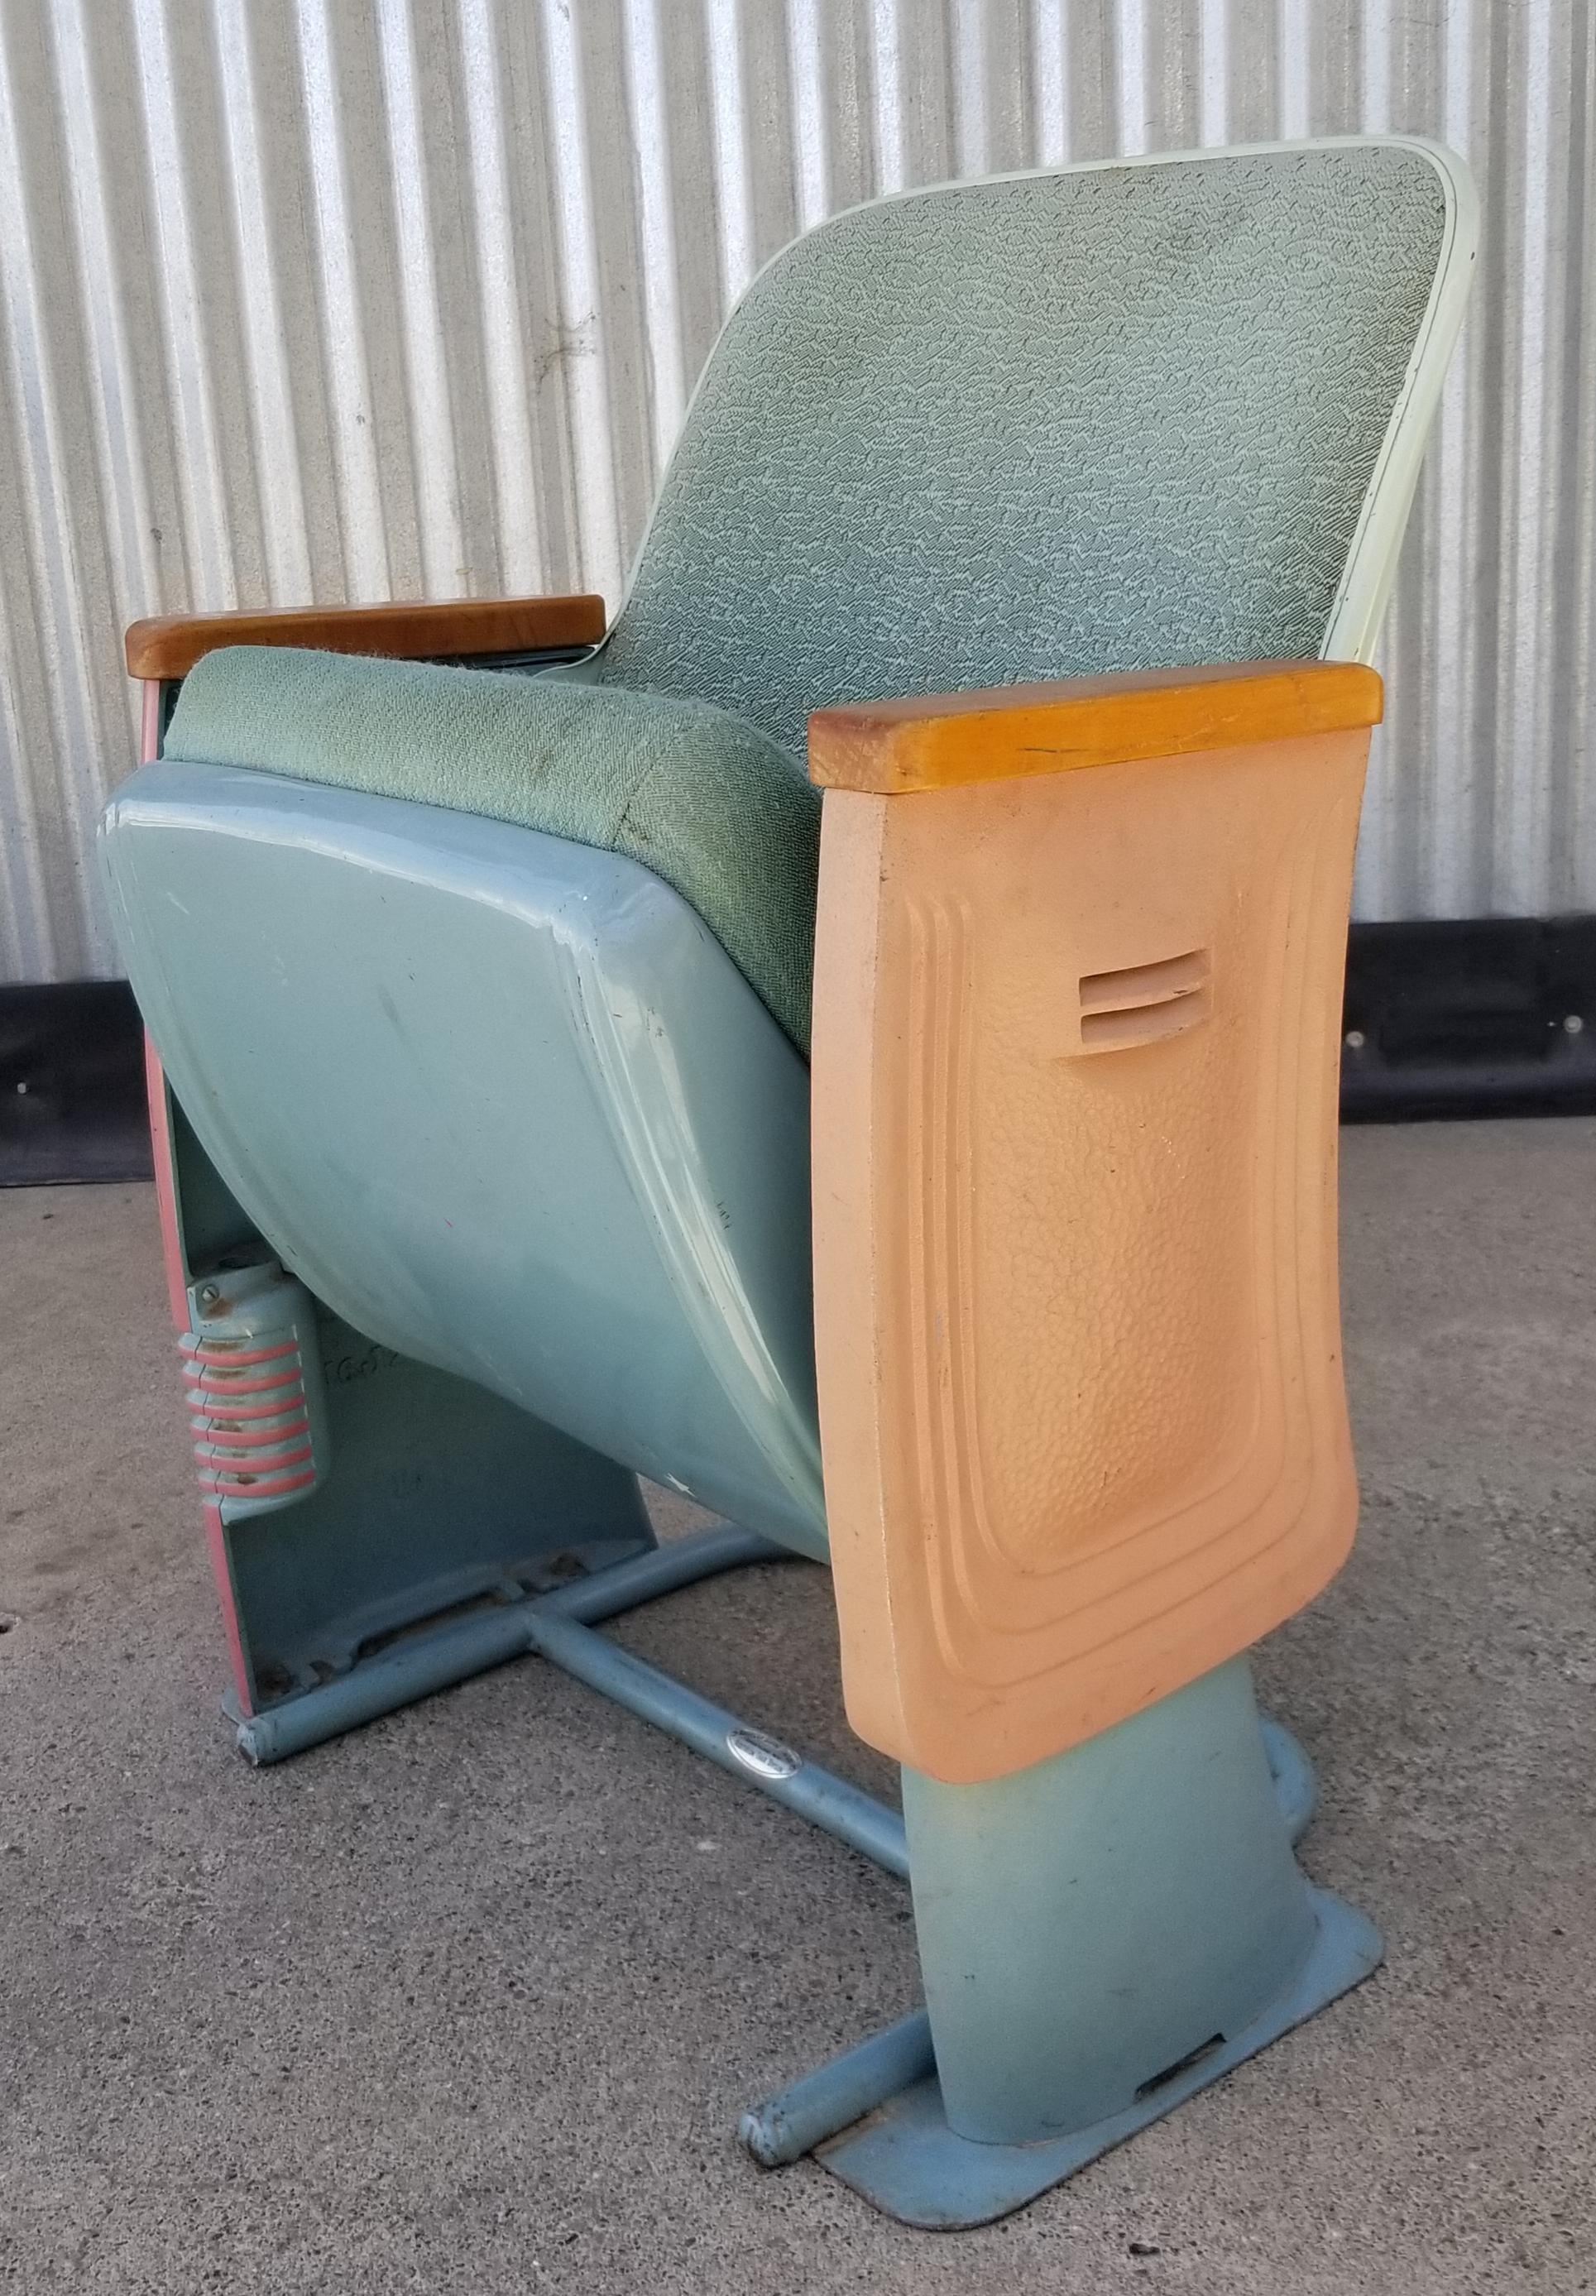 A rare mid-20th century Salesman's Sample theater or auditorium seat. Notice each side and armrests are different to show potential clients the choices available to order. See paper label order form indicating style, material, finish and upholstery